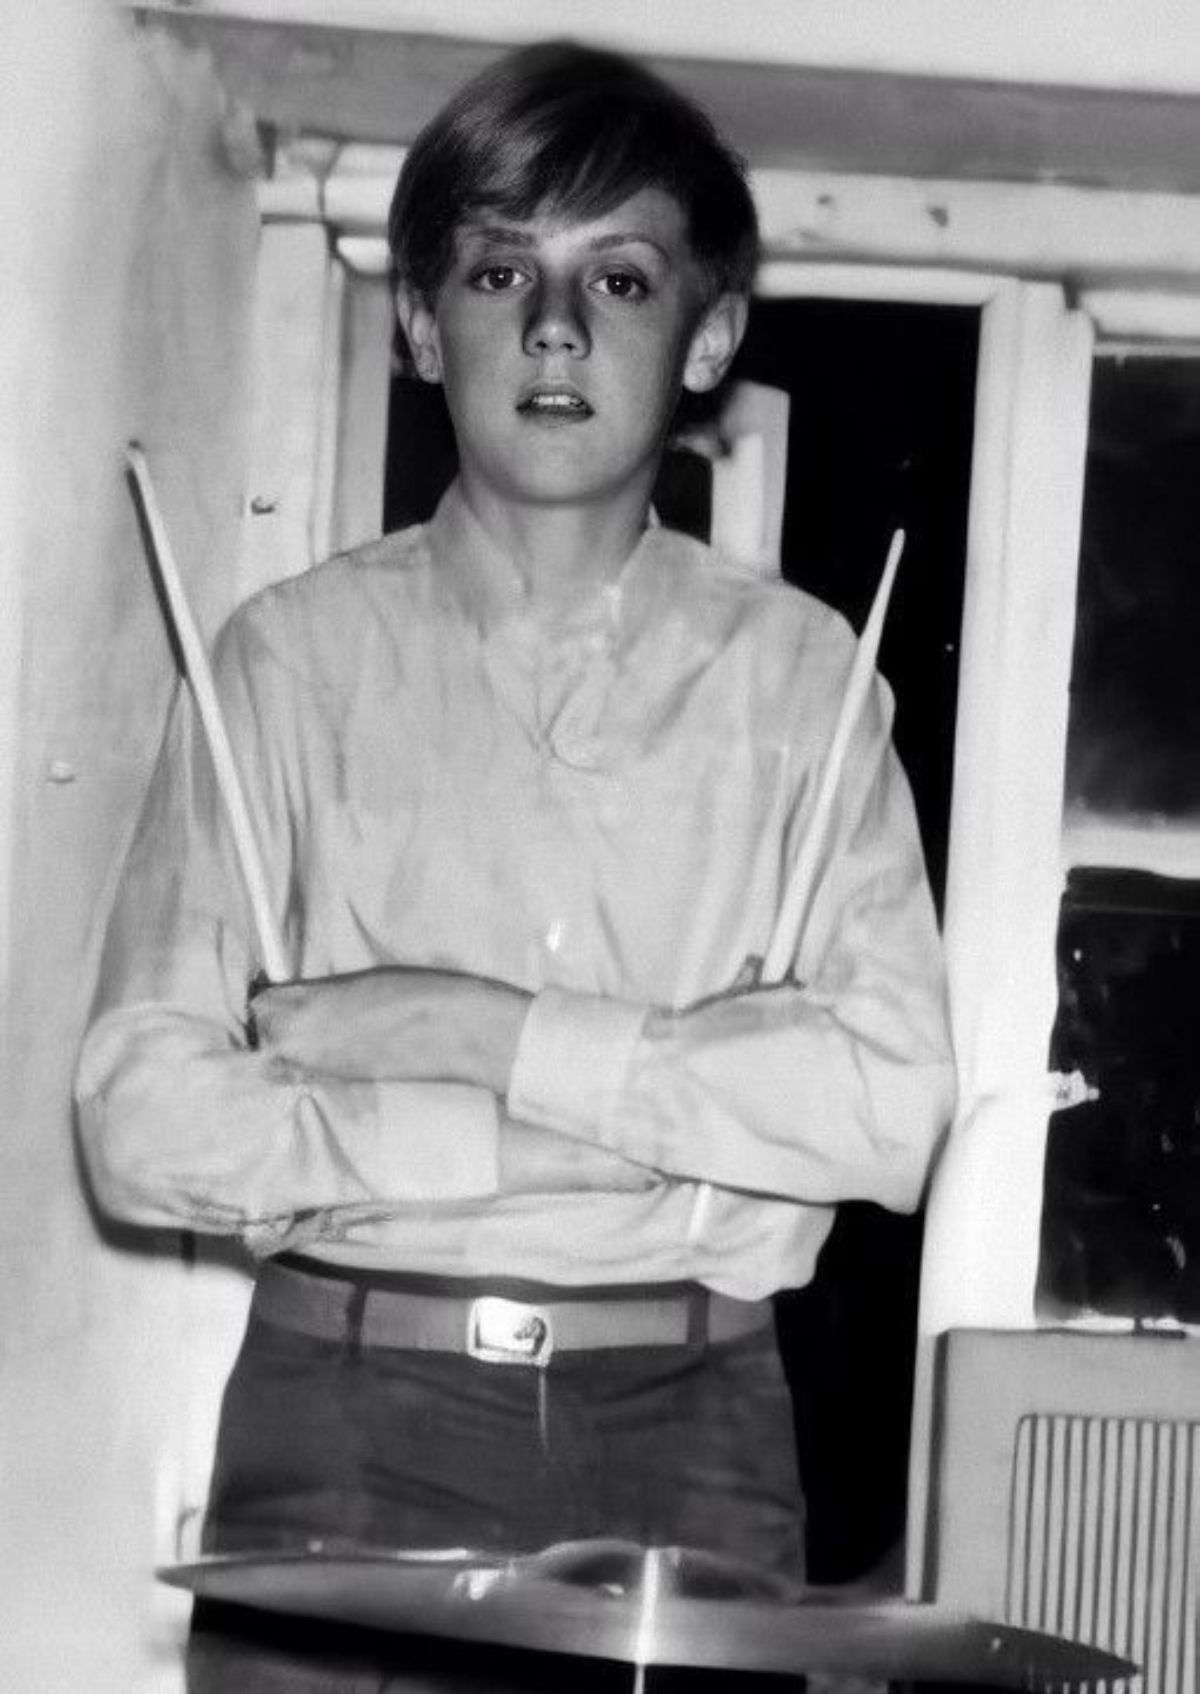 Roger Taylor as a child